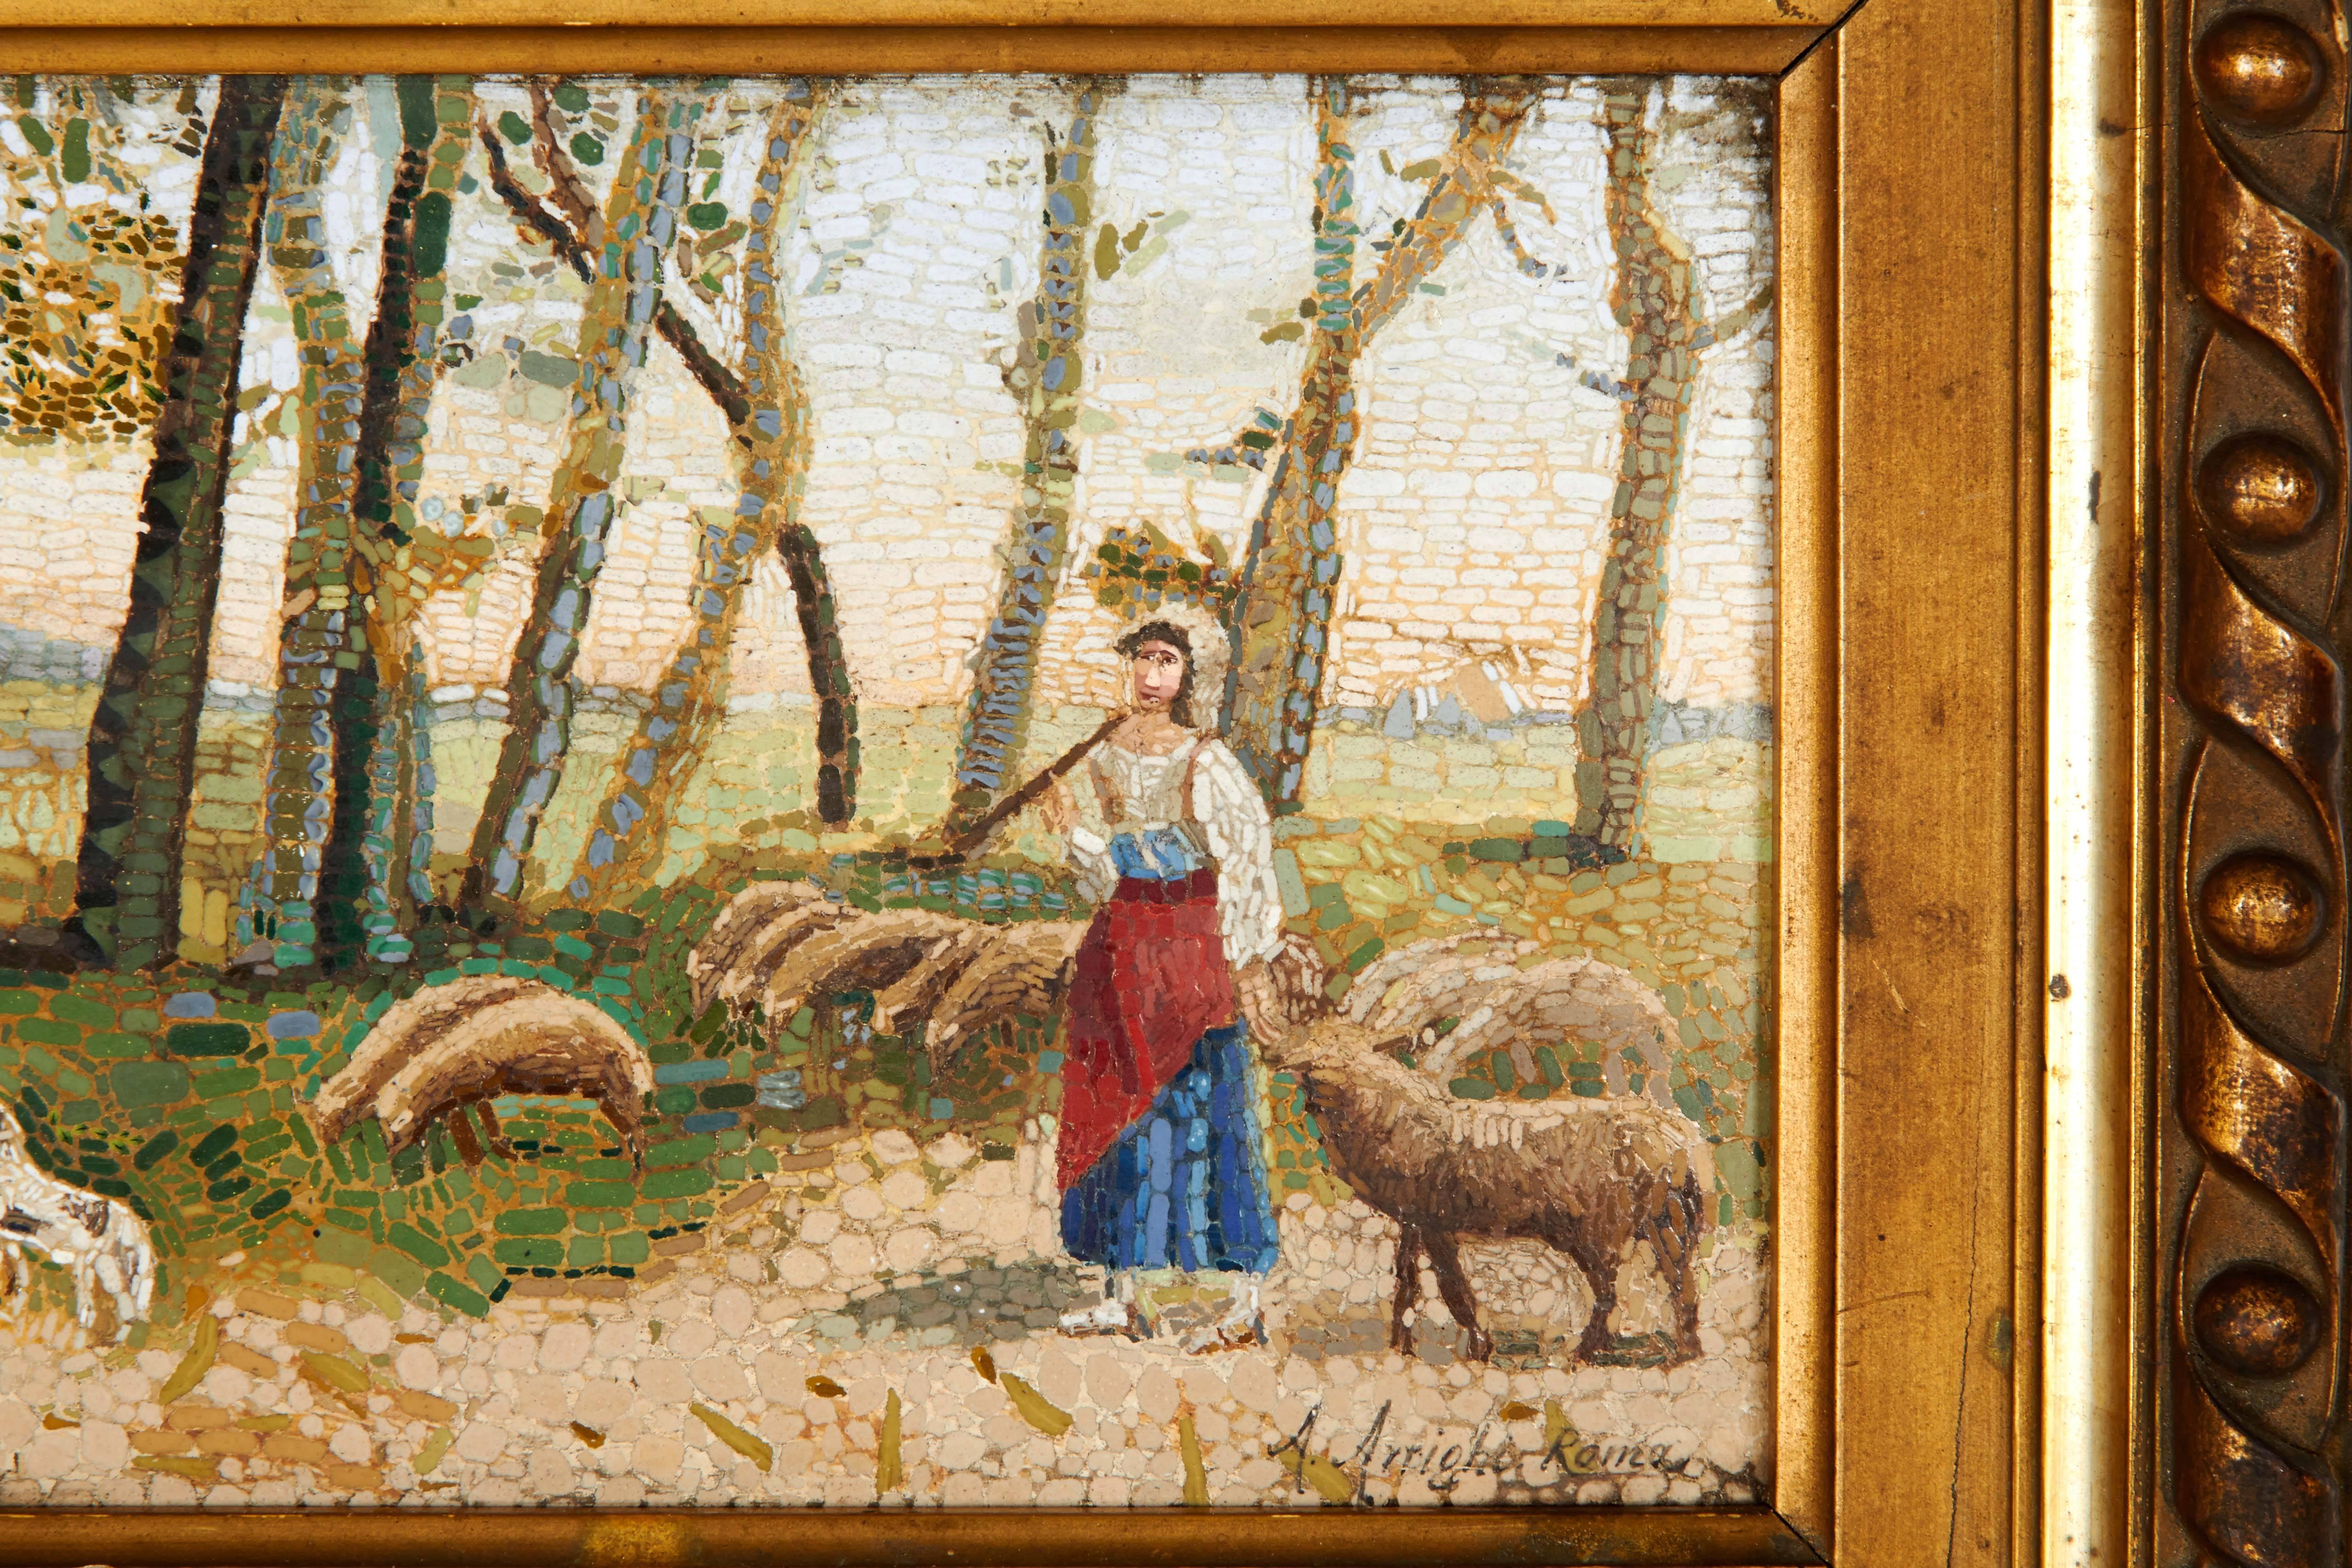 A vey fine Italian micro Mosaic plaque signed A. Arighi, Roma.

Depicting a woman and her animals in nature.

From the Mosaic Vatican Studio. 

Original gilt frame: 10